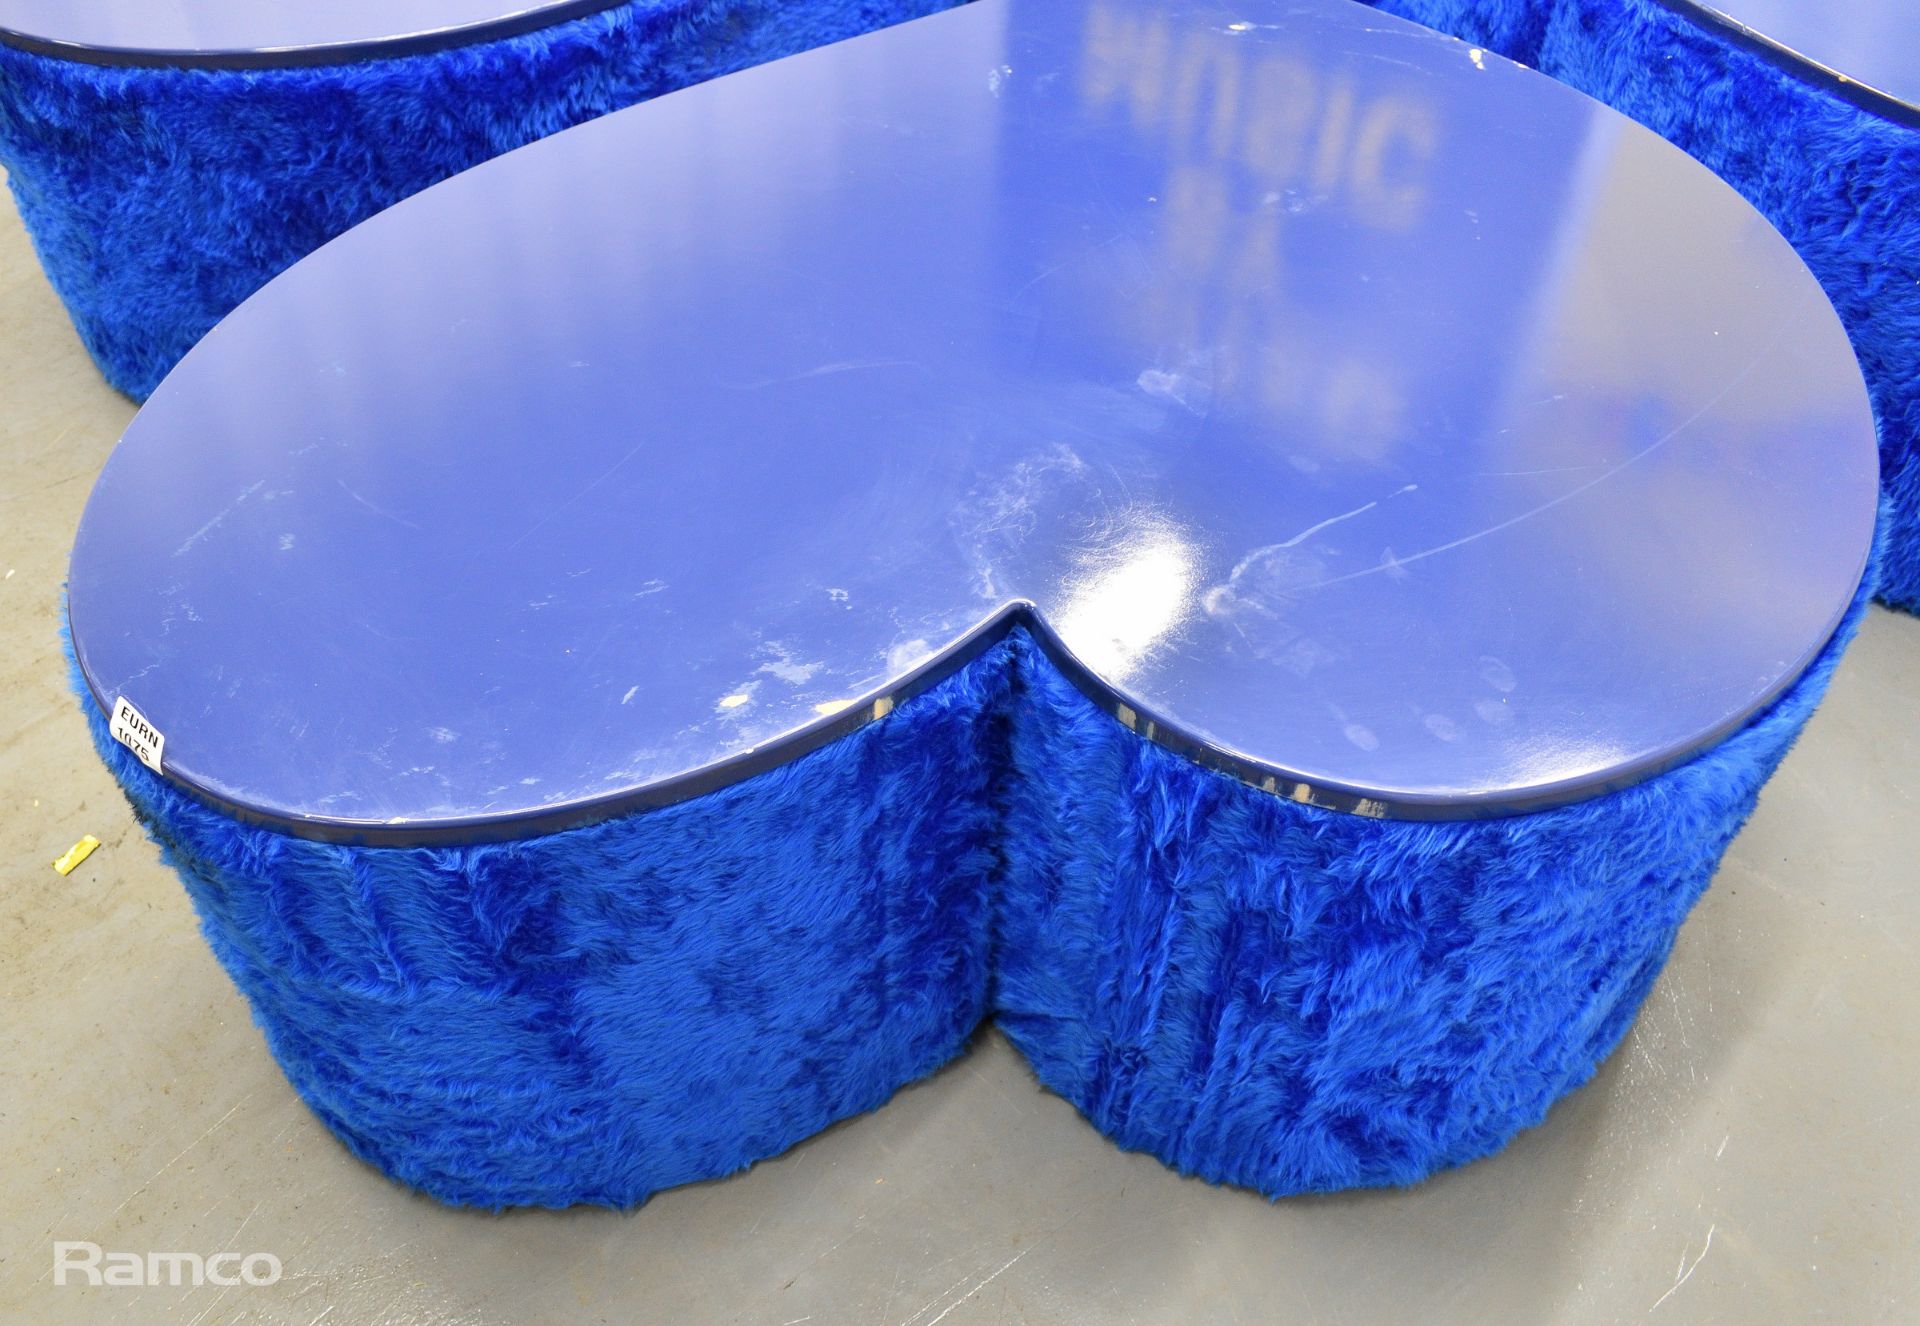 4x Asymmetrical heart shaped blue fur-covered wooden tables from countries' seating area - Image 7 of 16